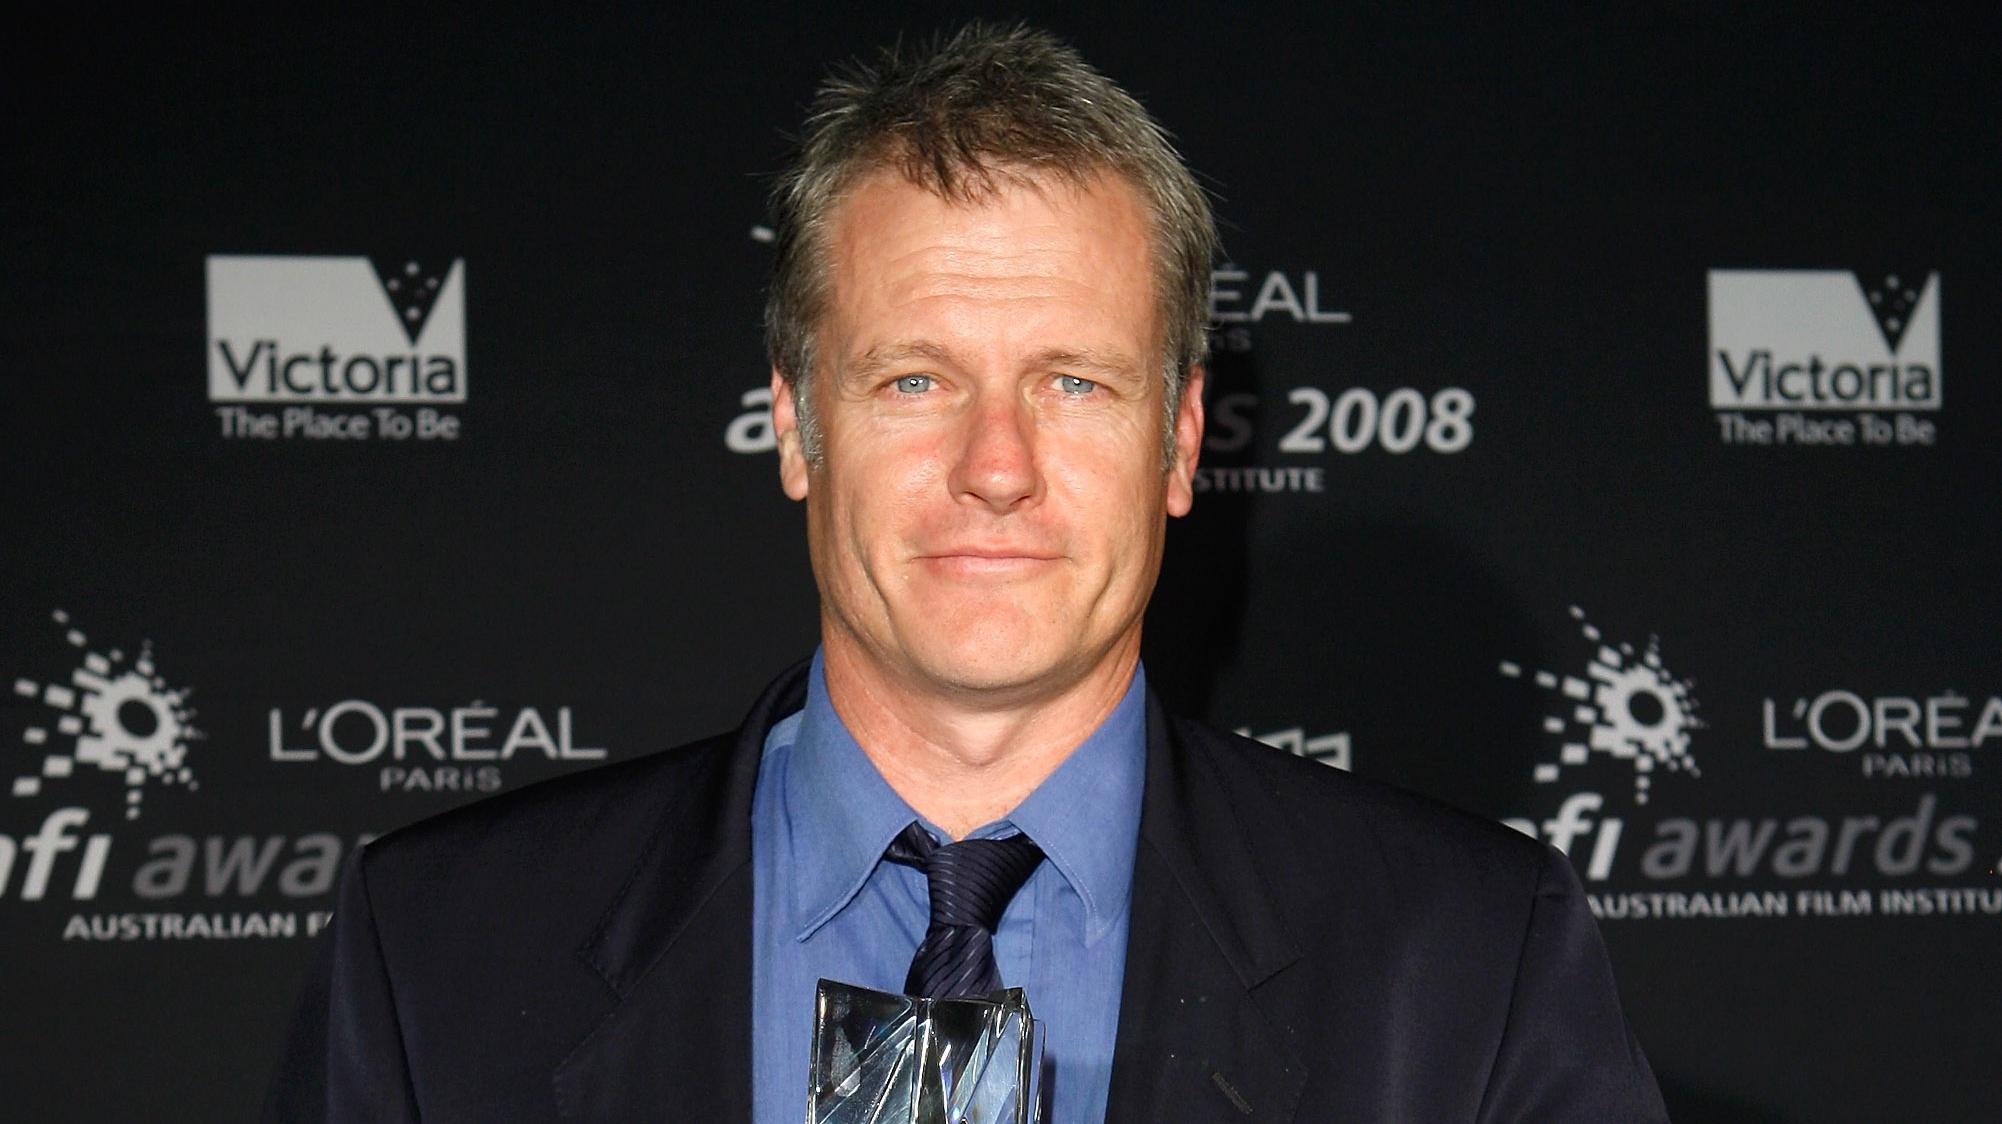 William McInnes poses with the AFI Award for Best Lead Actor for "Unfinished Sky" on December 6, 2008 